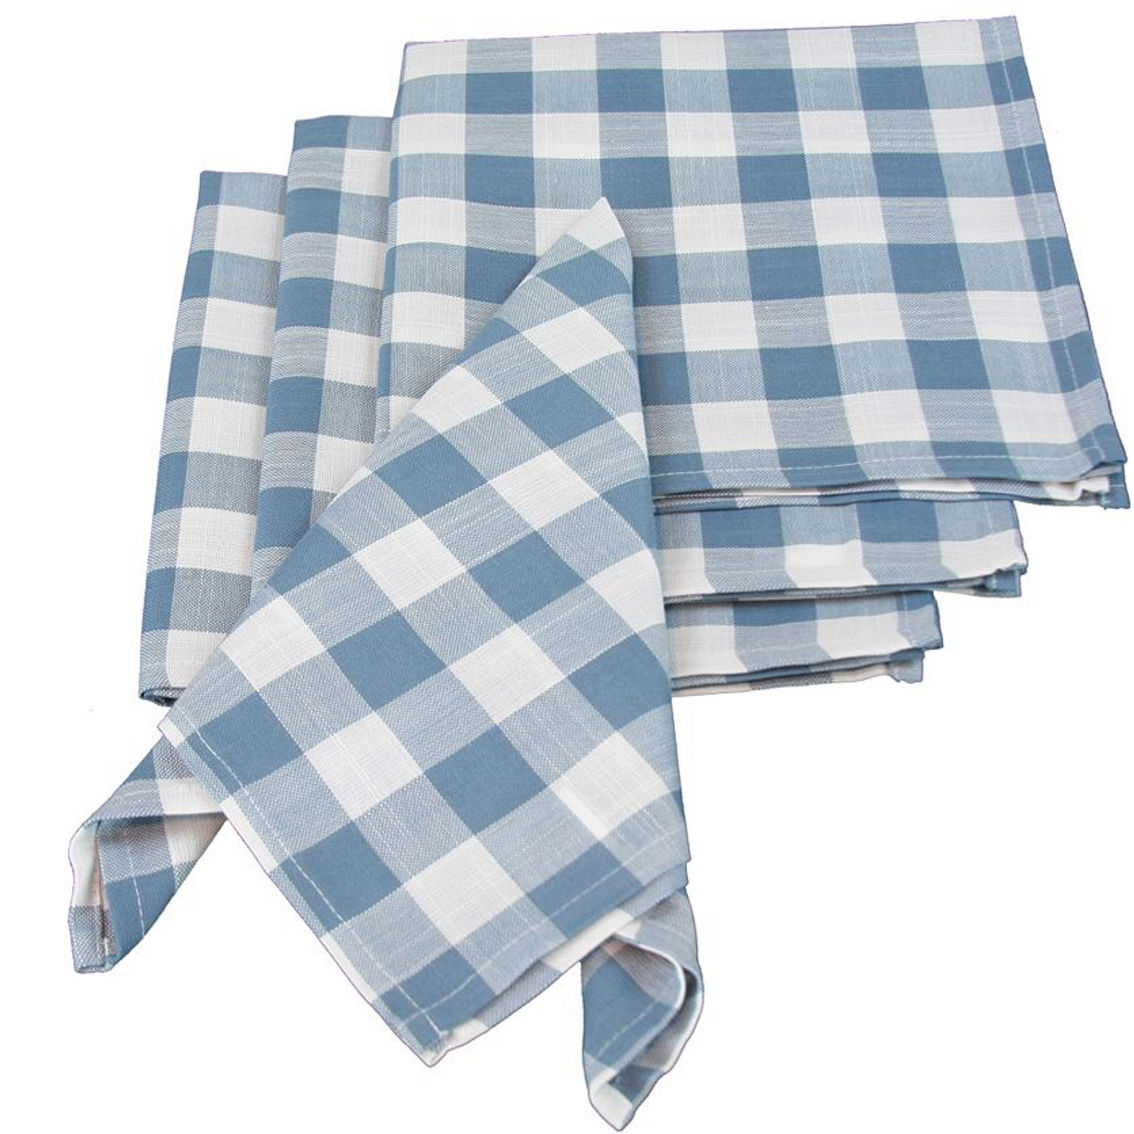 Xia Home Fashions, Gingham Check Set of 4 Napkins, 20In by 20In, Blue - Image 2 of 2